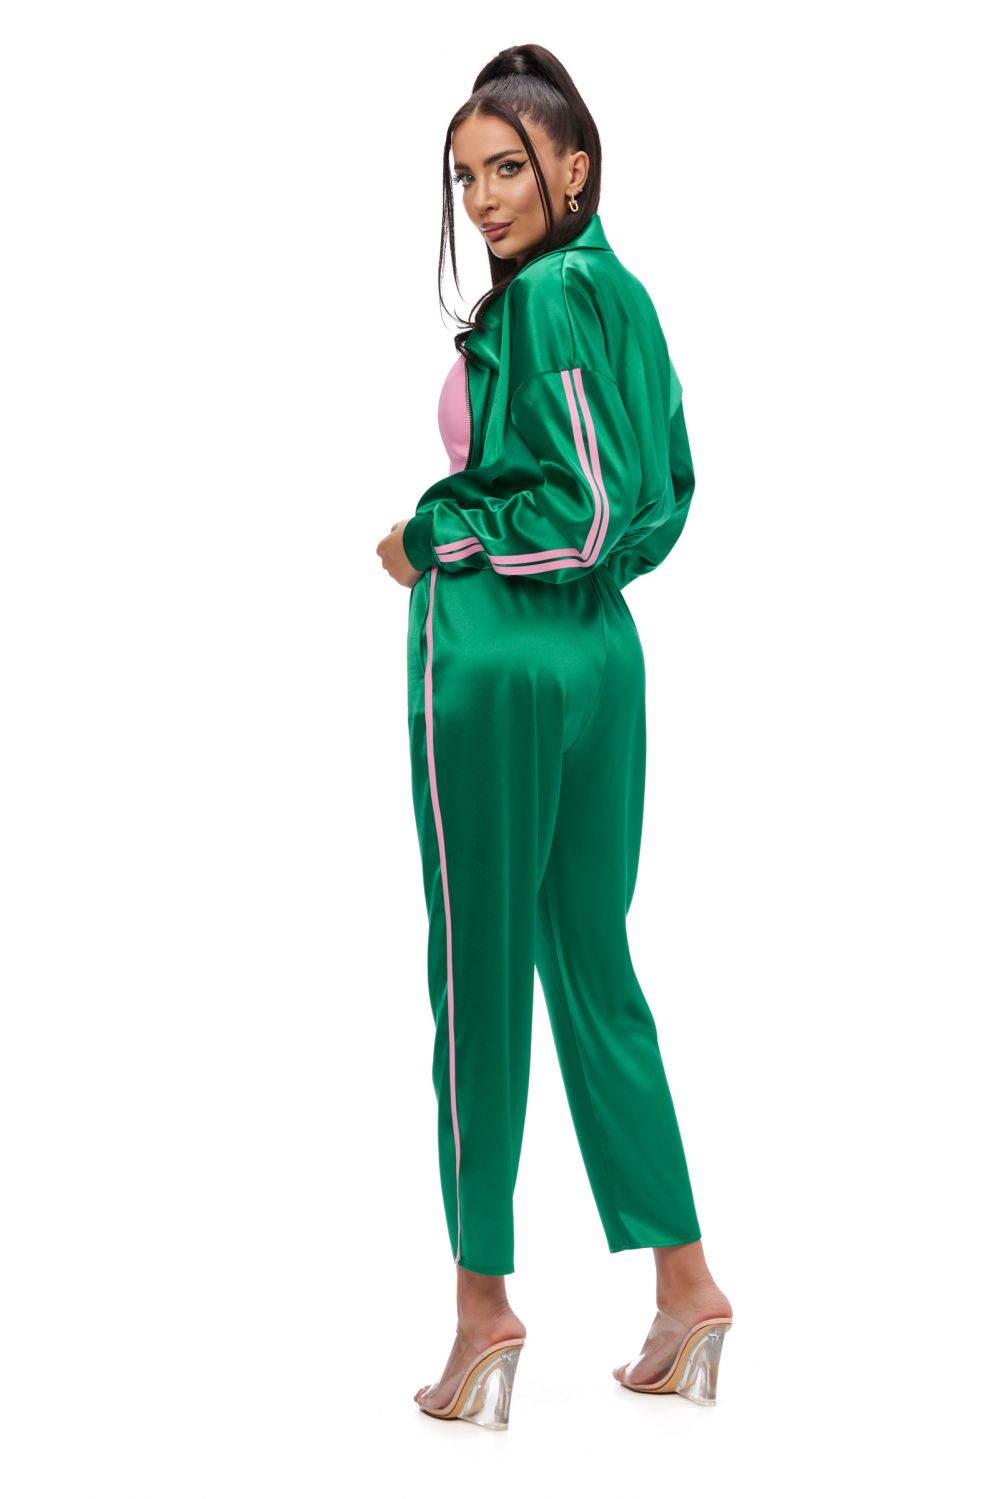 Pericla Bogas green casual lady's tracksuit